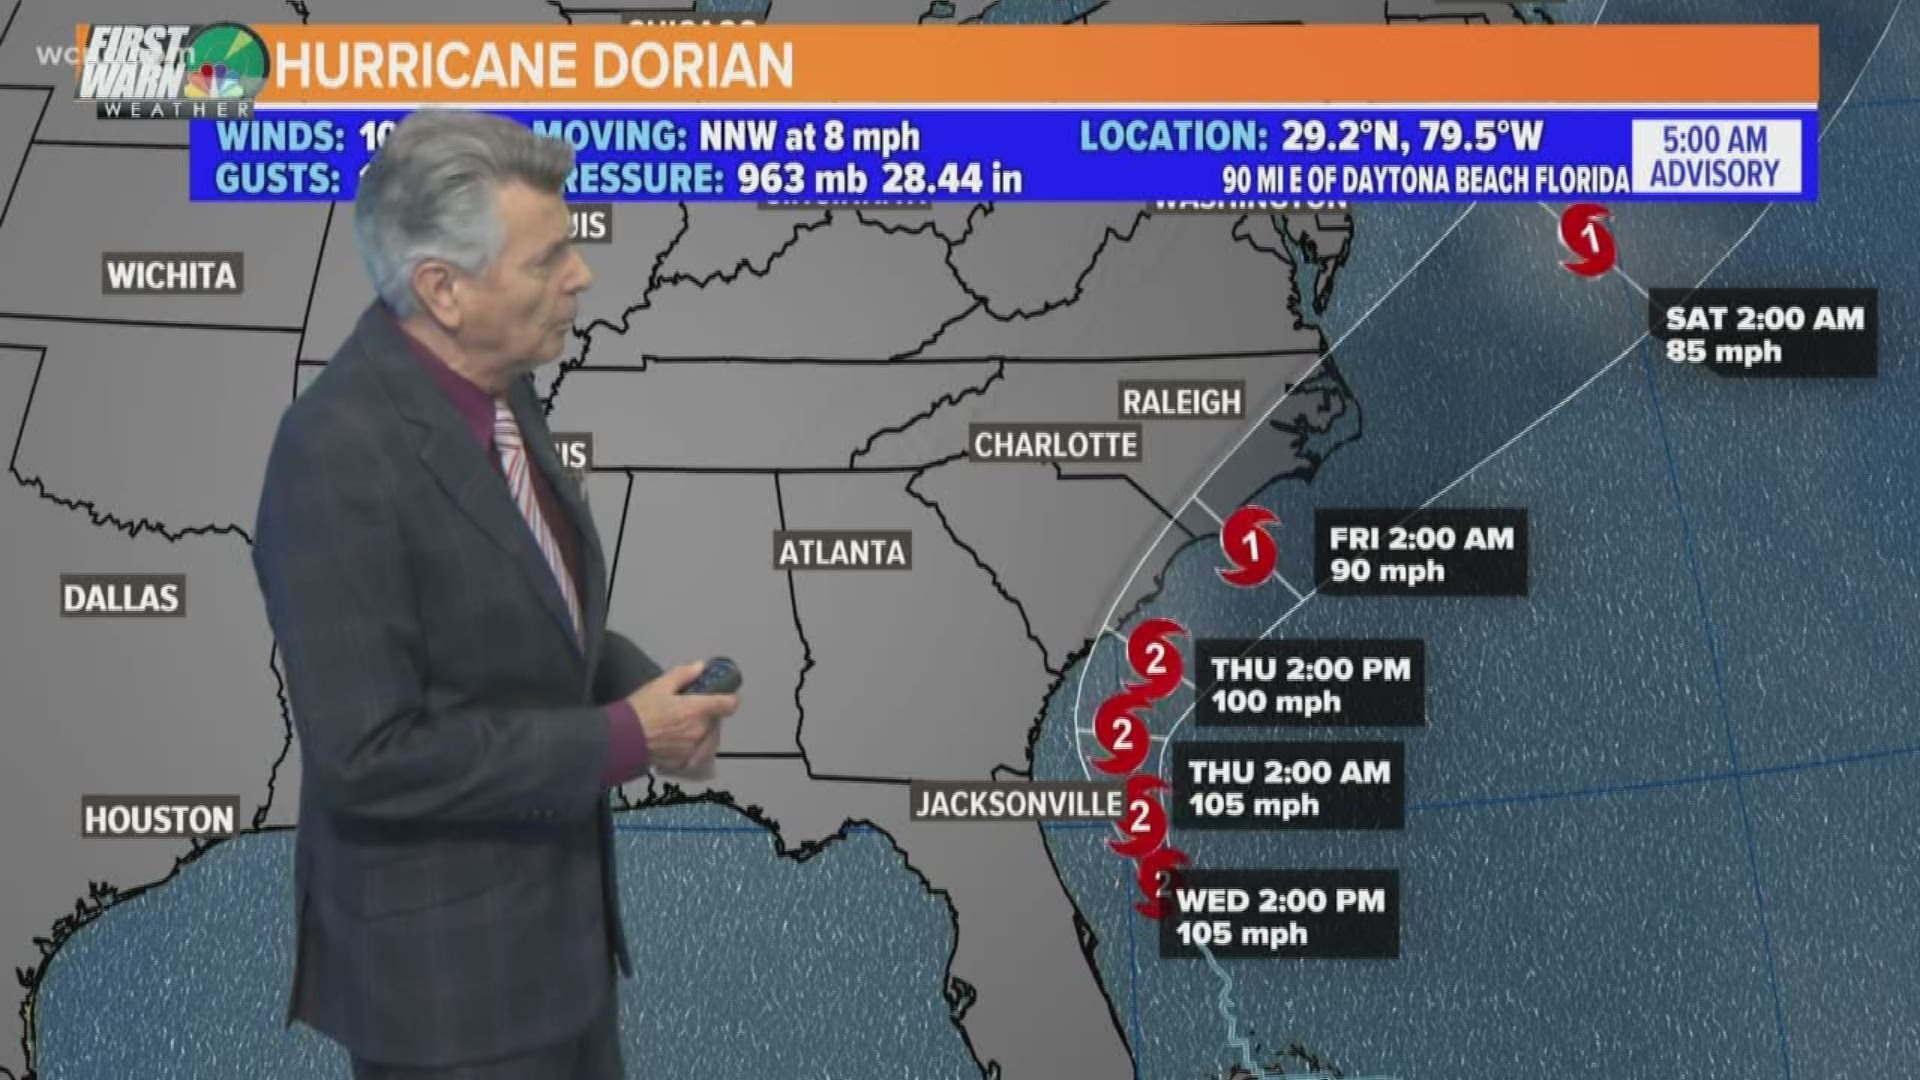 Hurricane Dorian continues to move north with sustained winds of 105 mph. The powerful and dangerous storm will create 7-10 feet of storm surge on the coast and dump nearly a foot of rain.